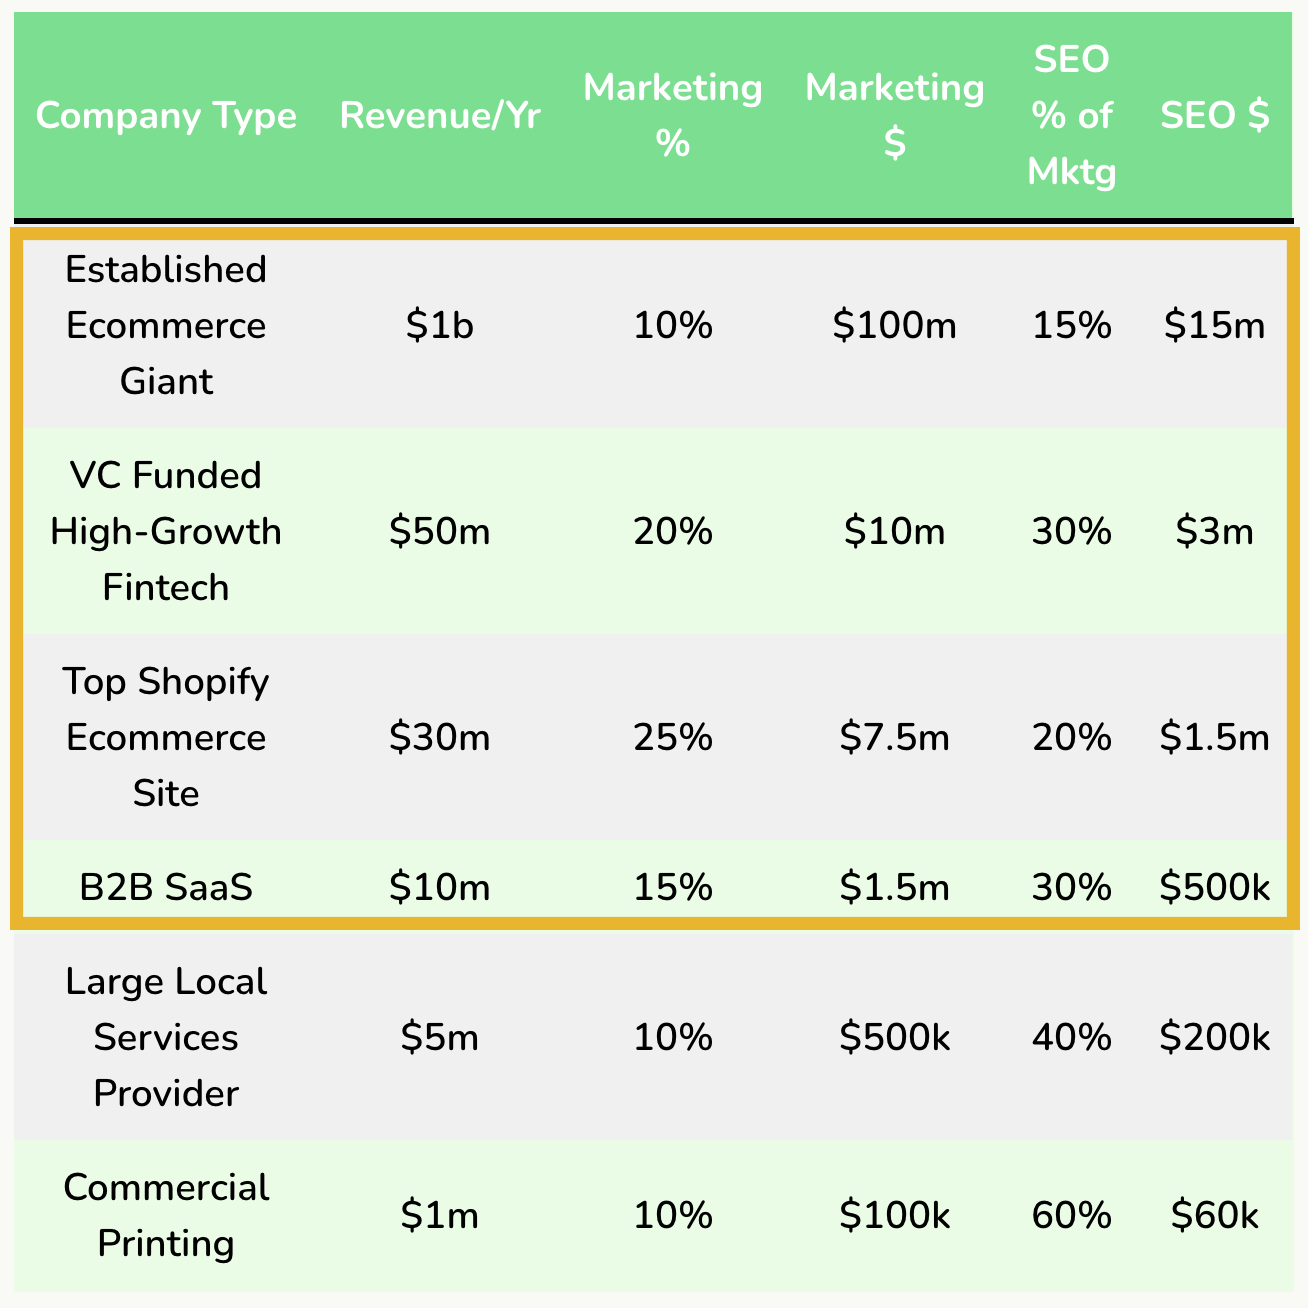 chart showing breakdown of revenue, and SEO spending